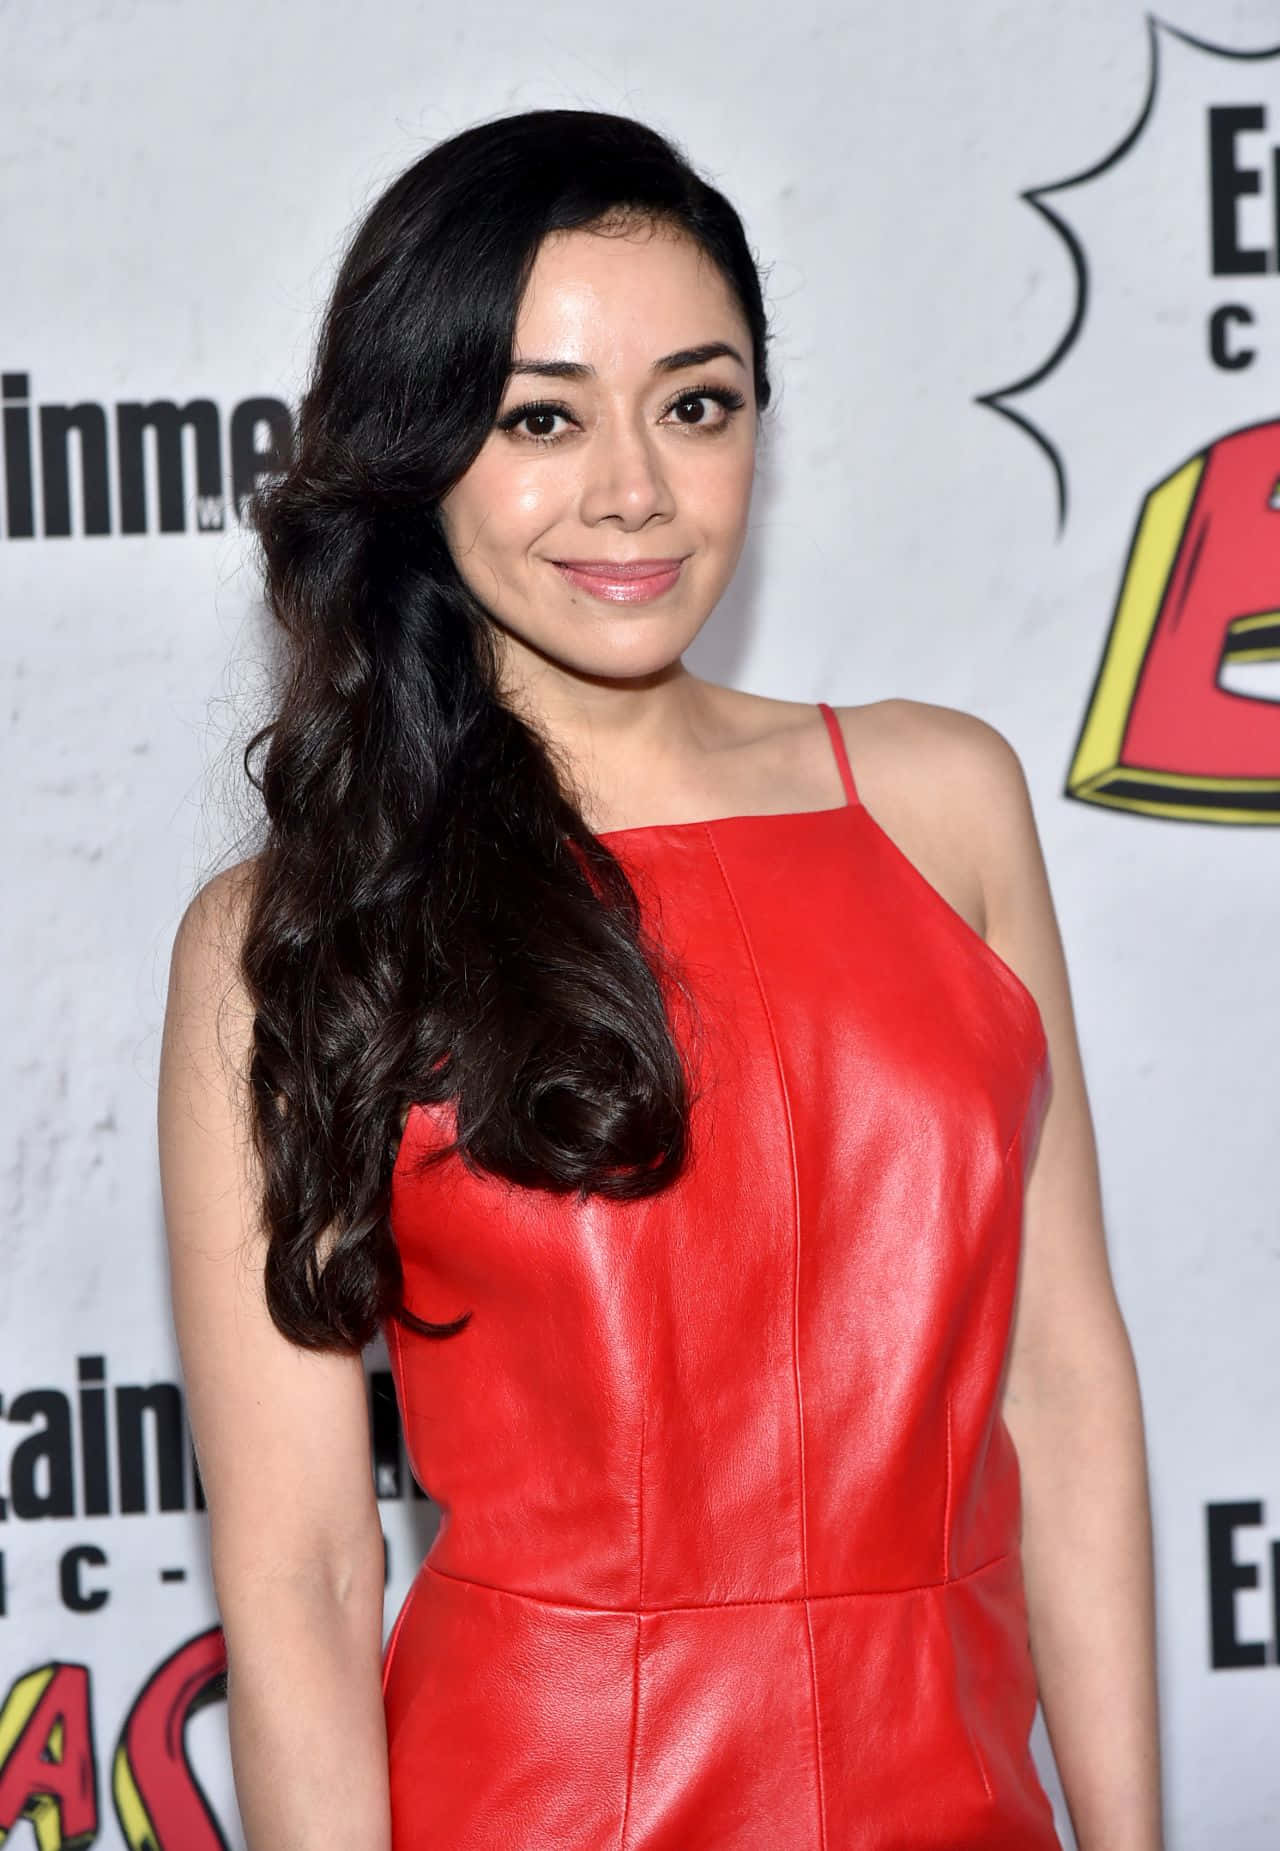 Aimee Garcia smiling at a photoshoot Wallpaper